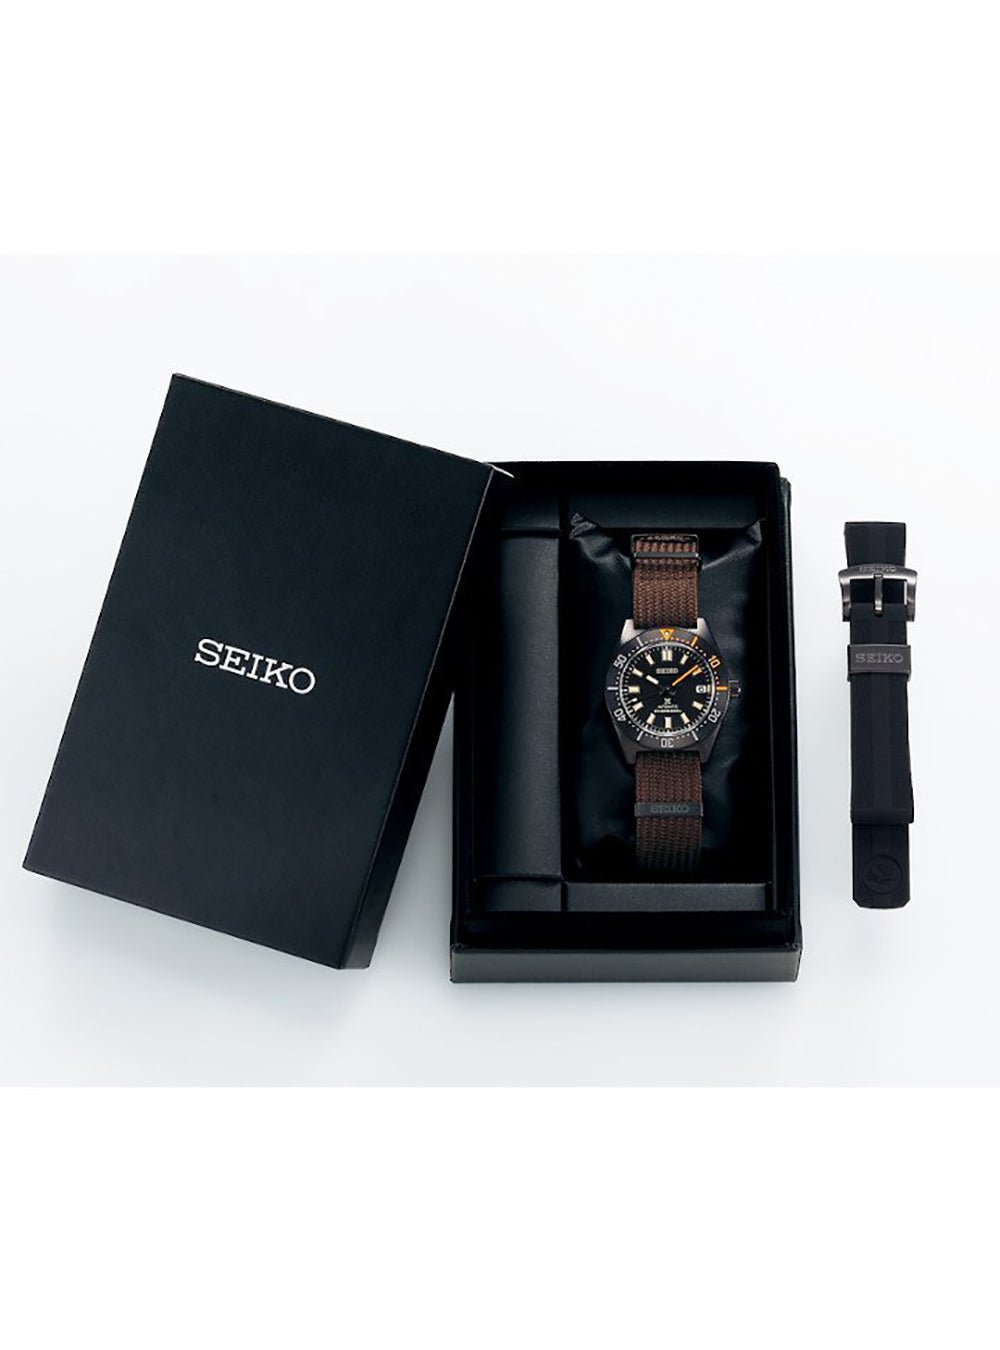 SEIKO PROSPEX THE BLACK SERIES LIMITED EDITION SBDC153 MADE IN